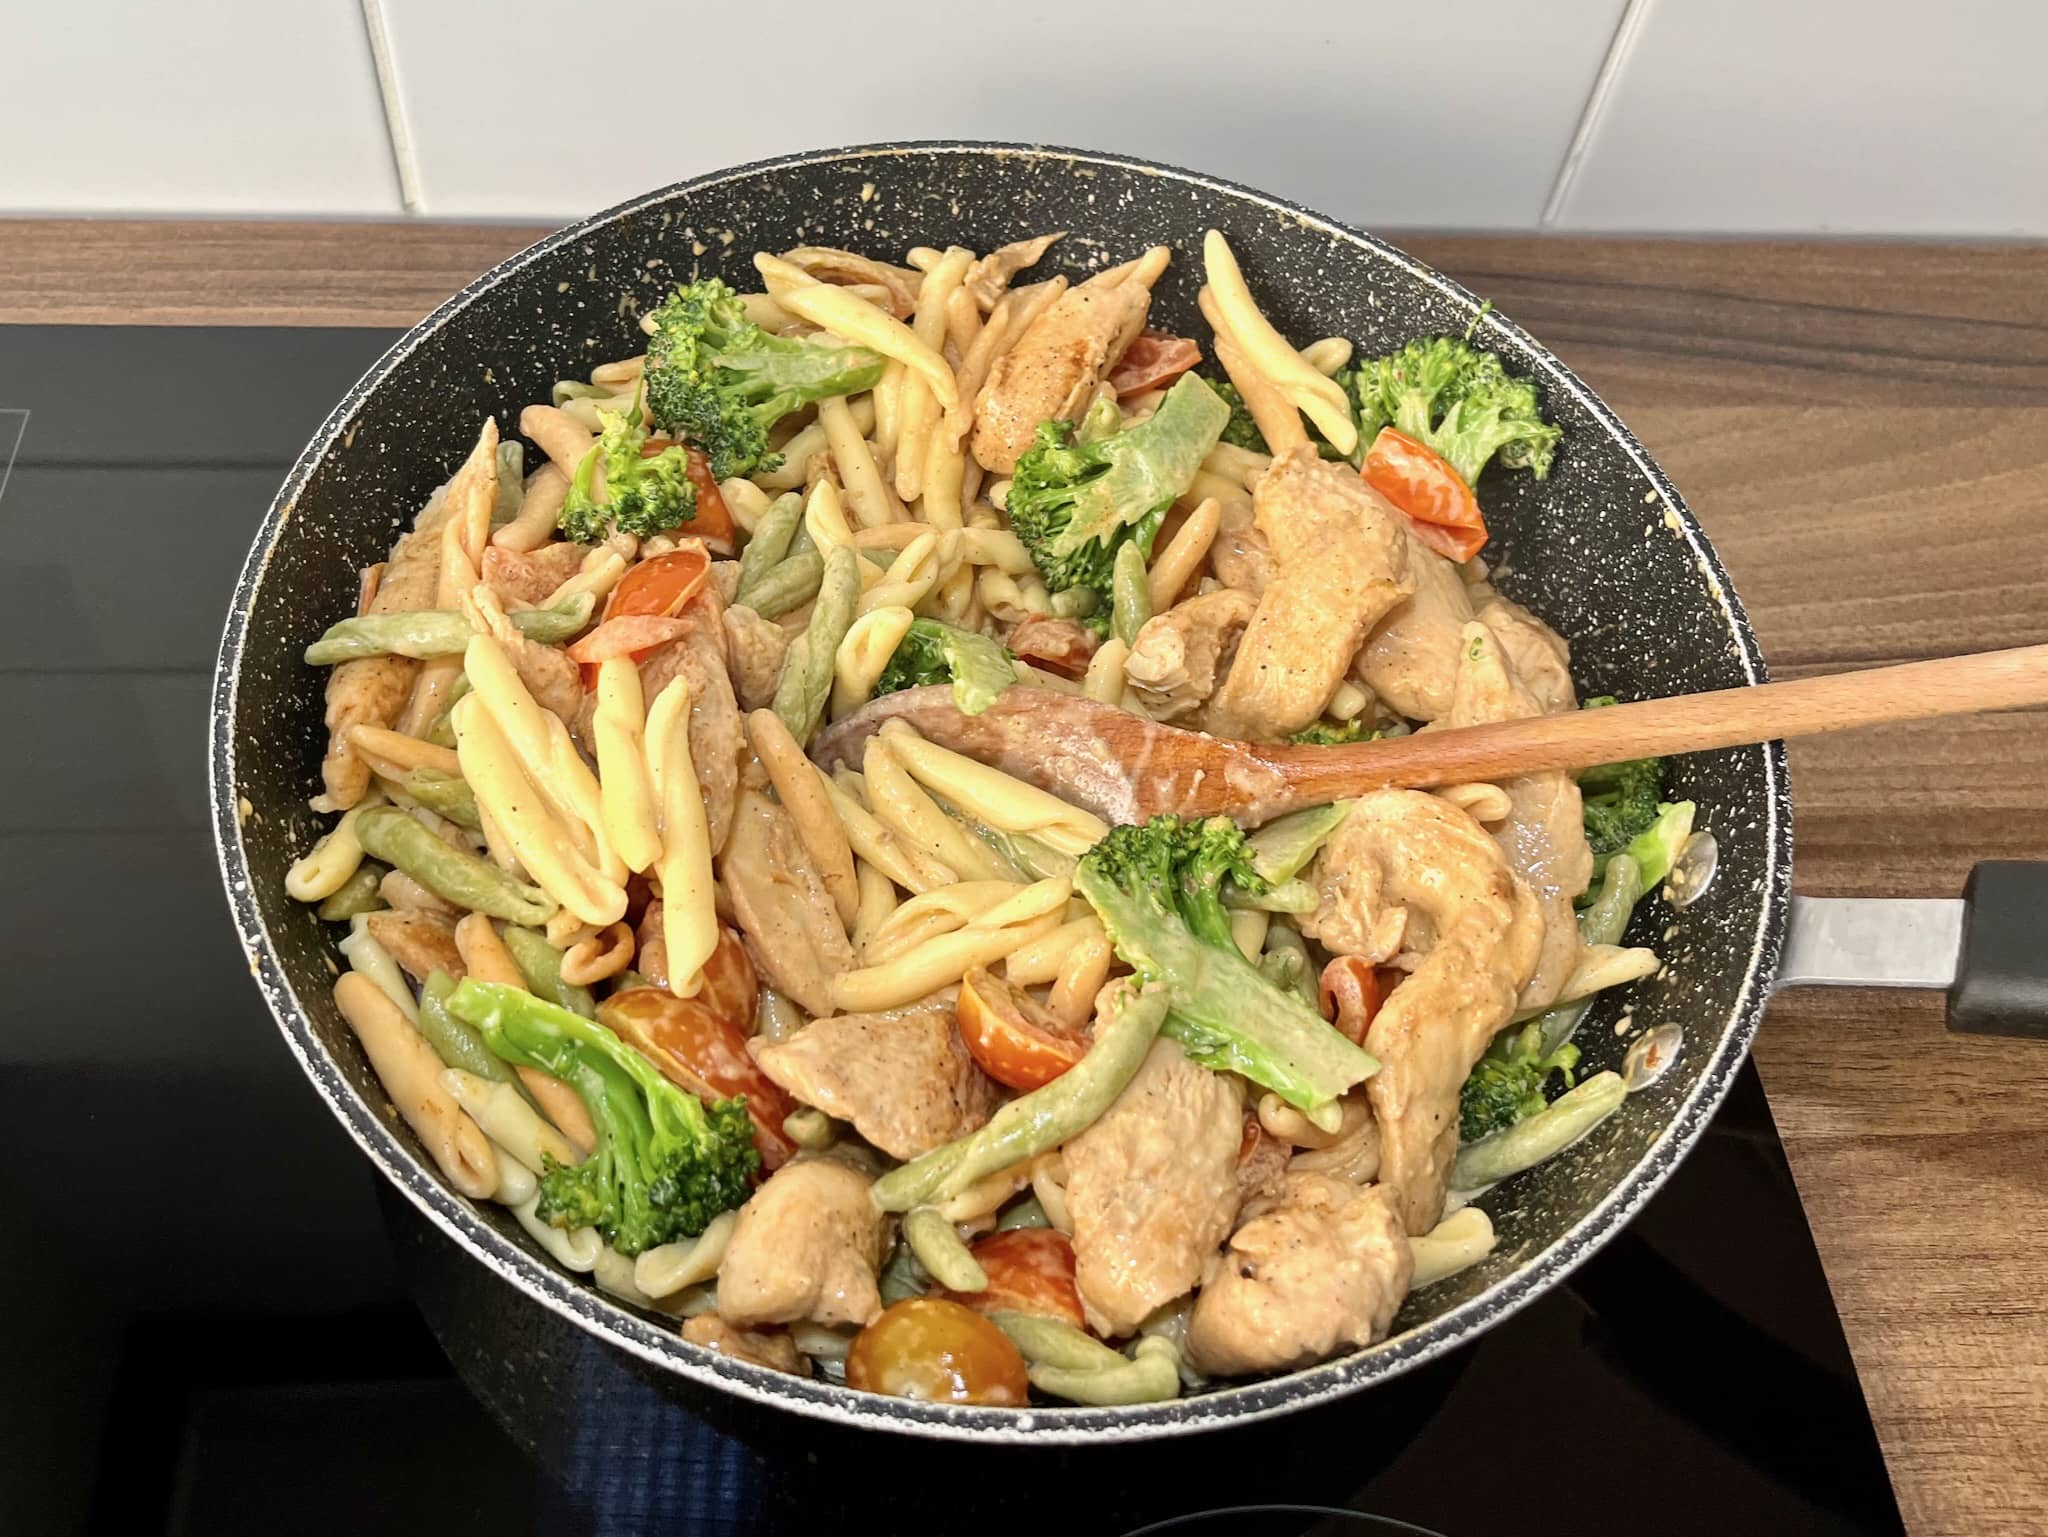 Pasta, broccoli, chicken, and cherry tomatoes cooked together in a large skillet until heated through.